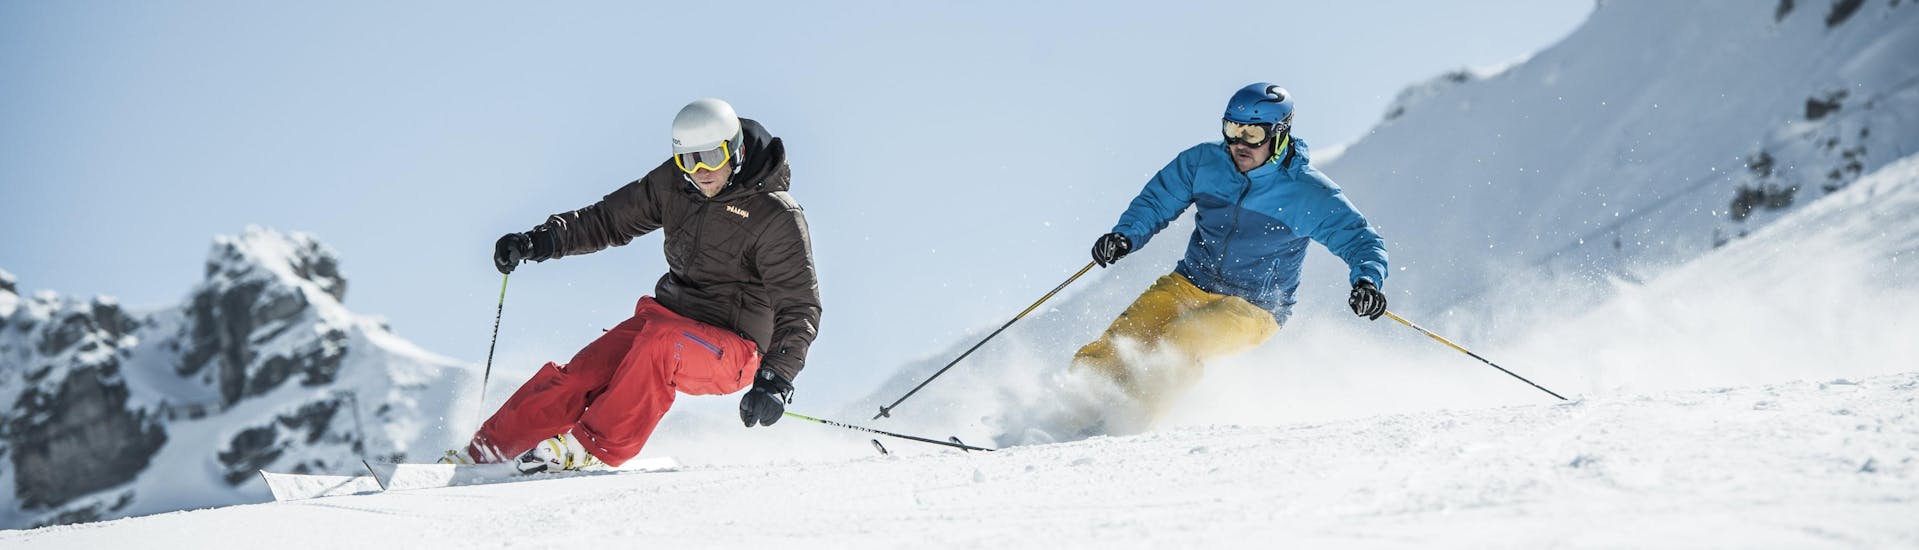 A skier practices the correct skiing technique during one of the private lessons in Ski-Optimal Hochzillertal.